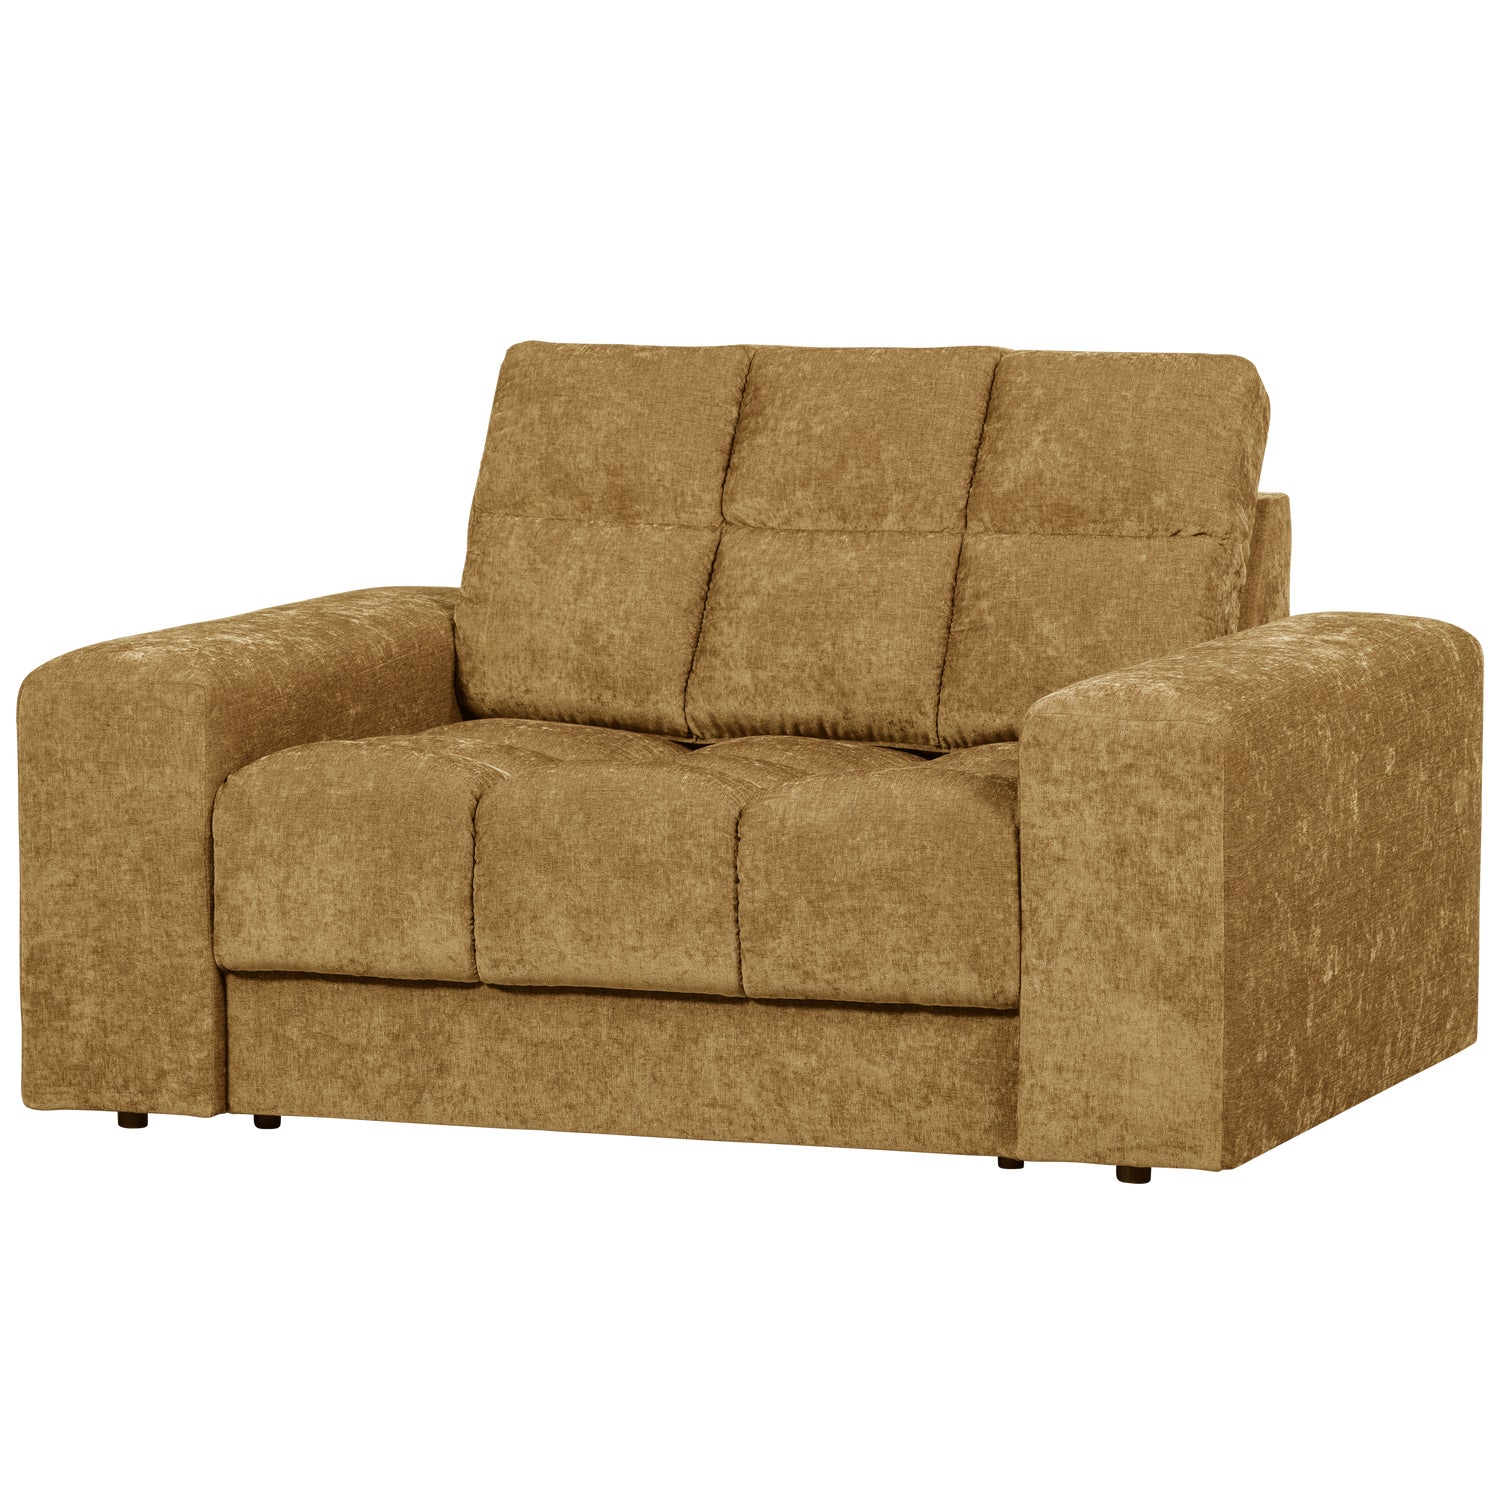 379006-O-02_VS_WE_Second_date_loveseat_vintage_goud_SA.png?auto=webp&format=png&width=1500&height=1500